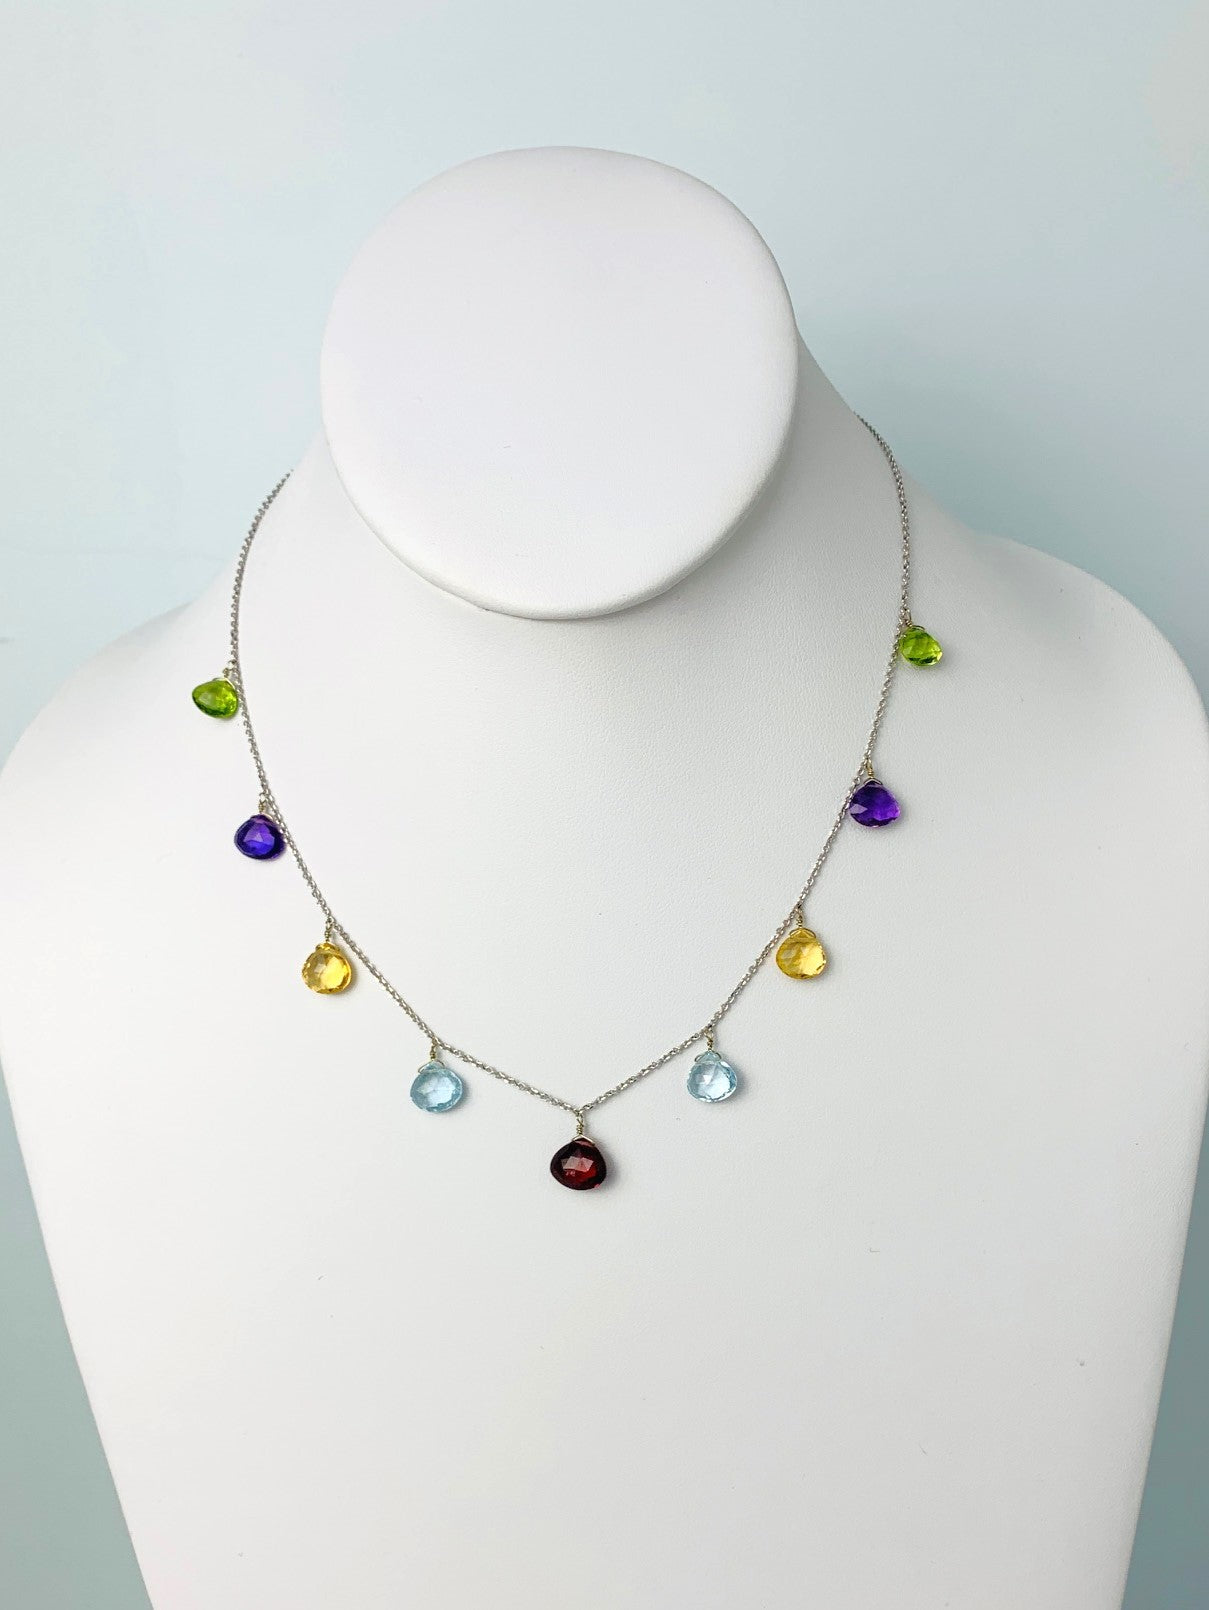 16"-17" Multicolored Gemstone 9 Station Dangly Necklace in 14KW - NCK-617-DNGGM14W-MLTI-17